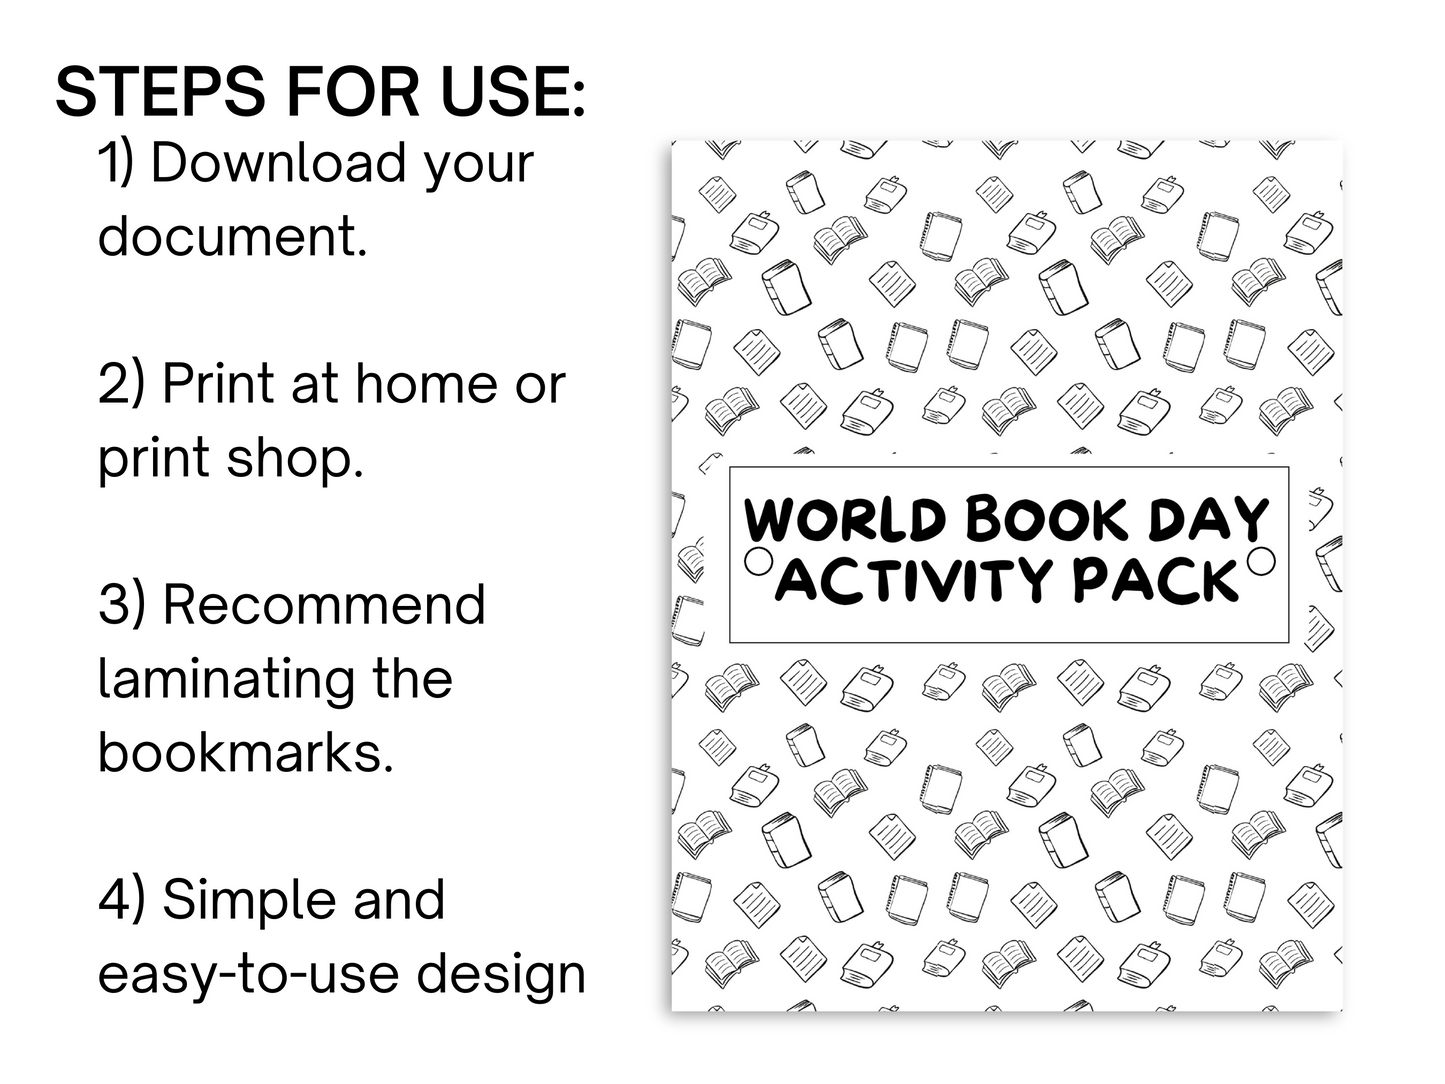 Steps on how to use world book day activity pack in black and white.